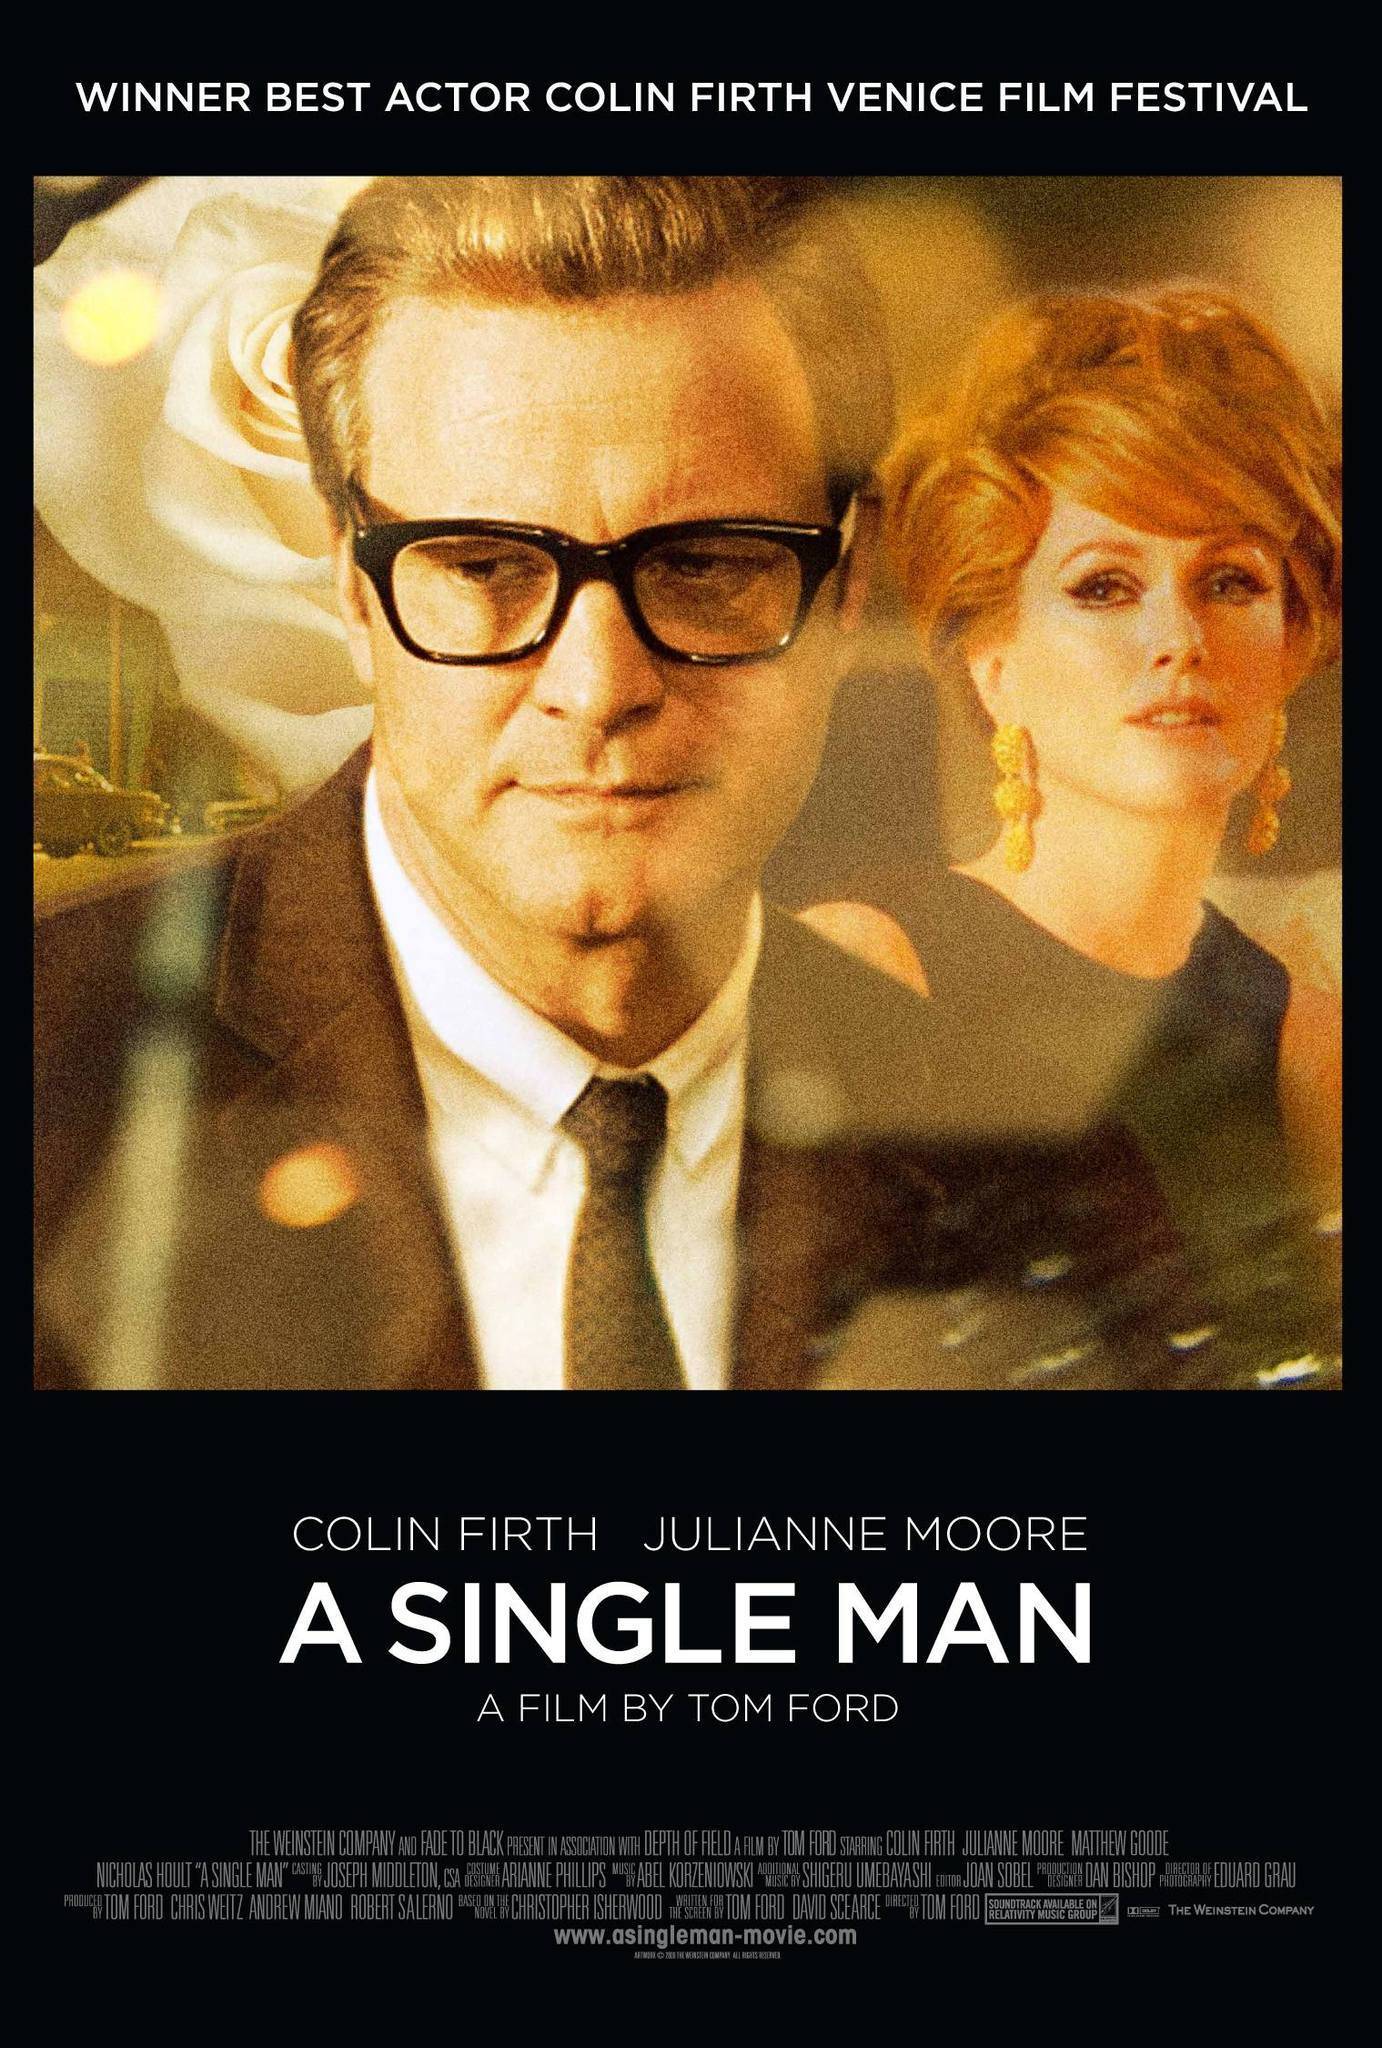 Movie post for "a single man".